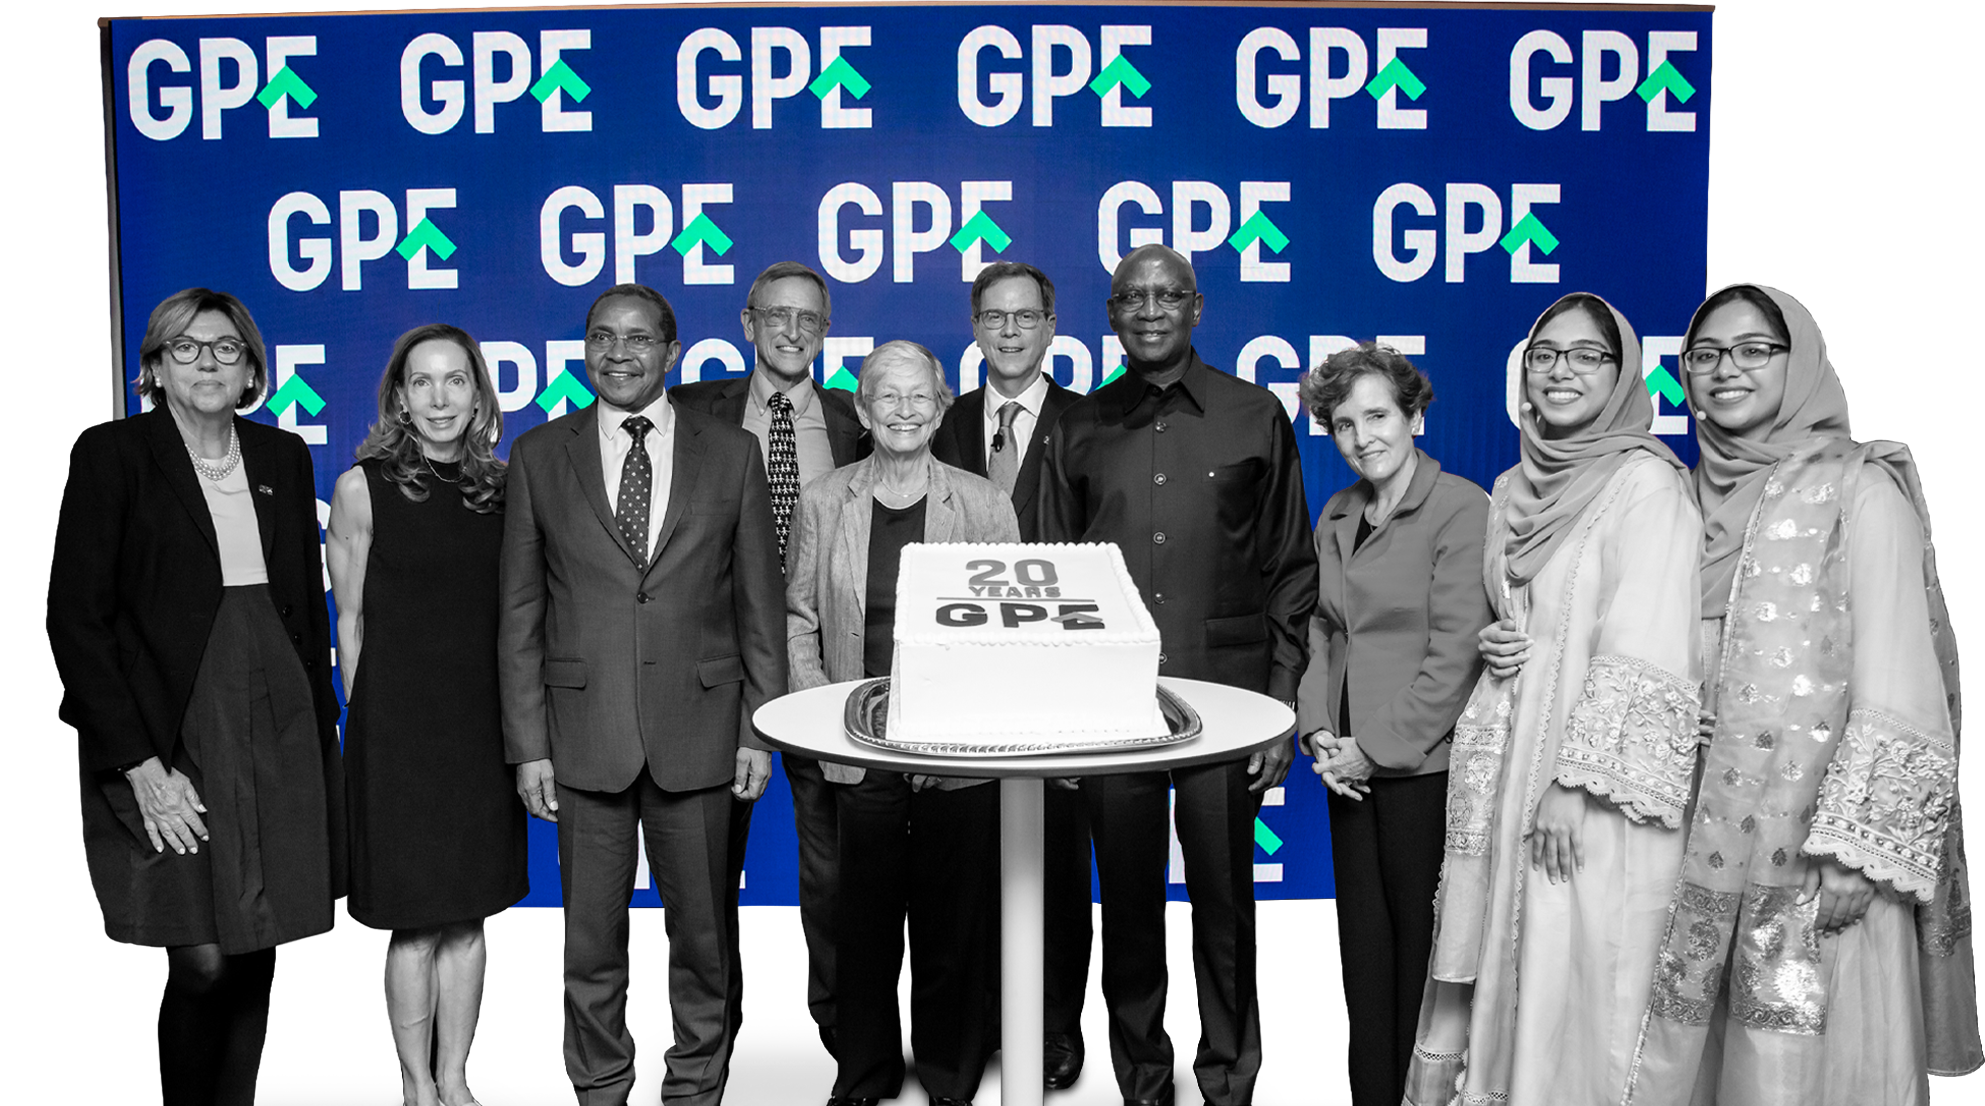 GPE celebrated 20 years of investing in quality education for every child